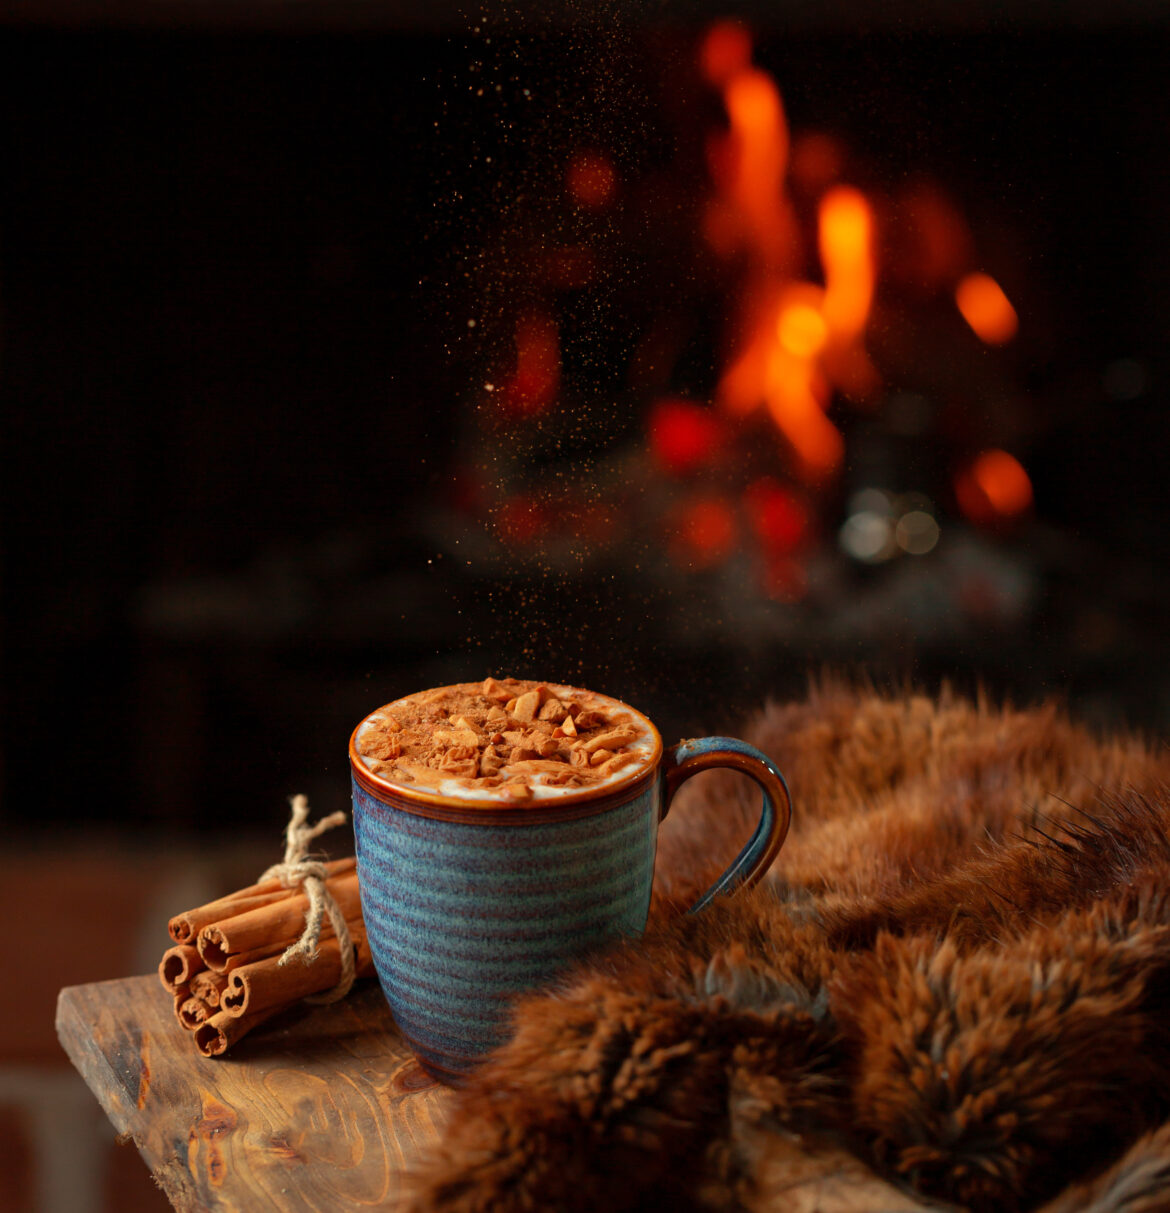 Hot sahlab drink (arabic: سحلب) with cinnamon and fireplace